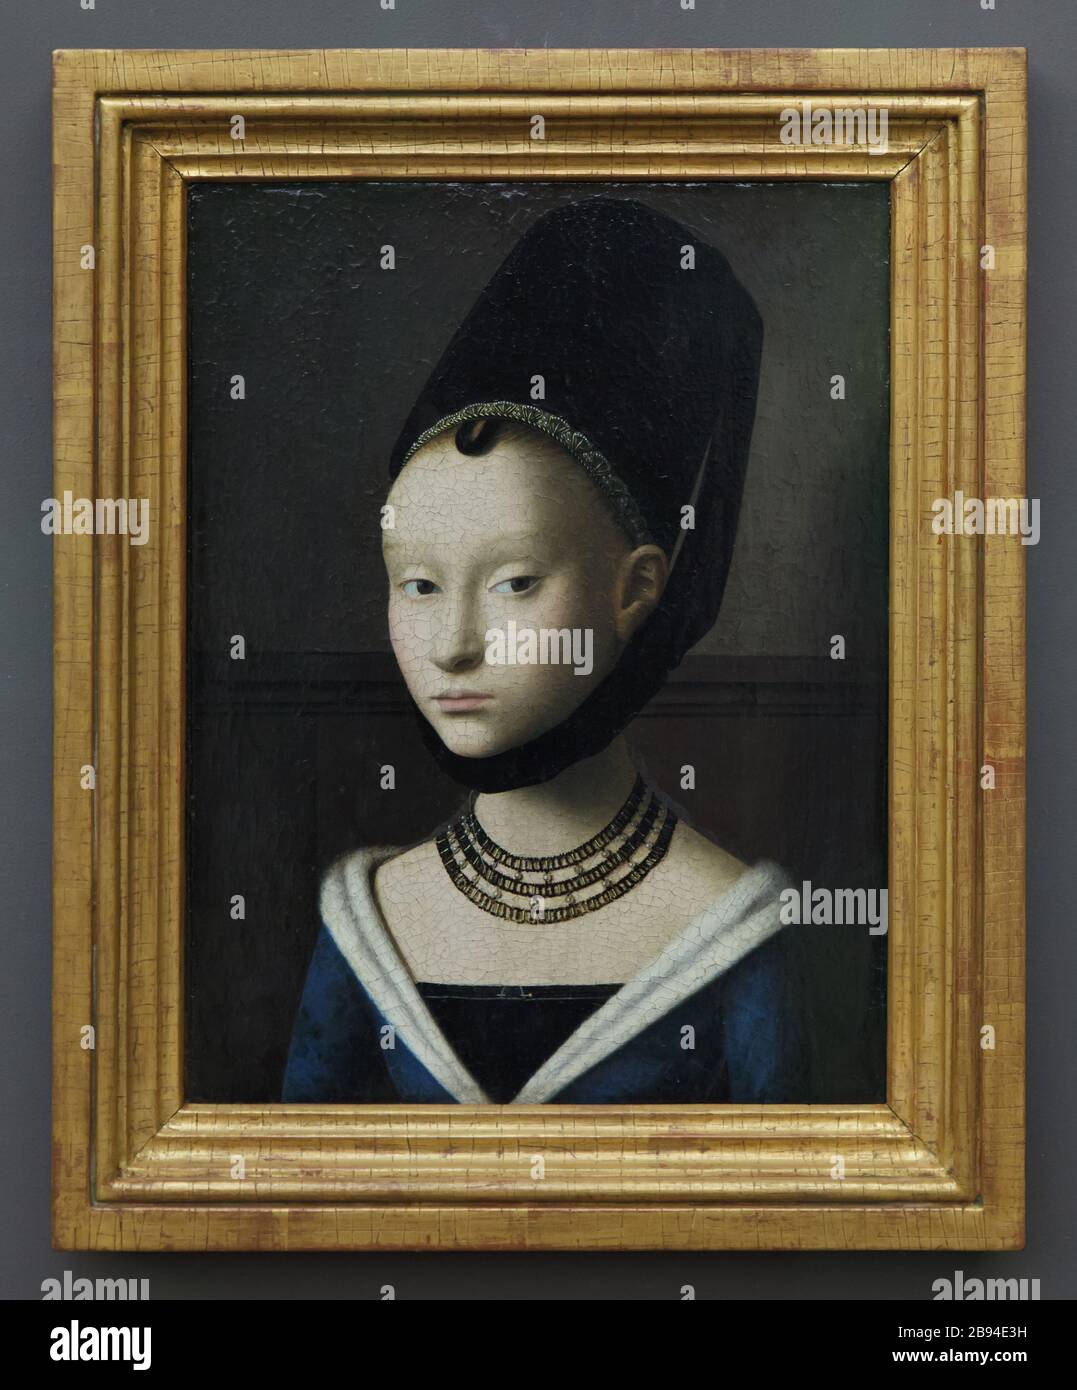 Painting 'Portrait of a Young Girl' by Early Netherlandish Renaissance painter Petrus Christus (1470) on display in the Berliner Gemäldegalerie (Berlin Picture Gallery) in Berlin, Germany. Stock Photo